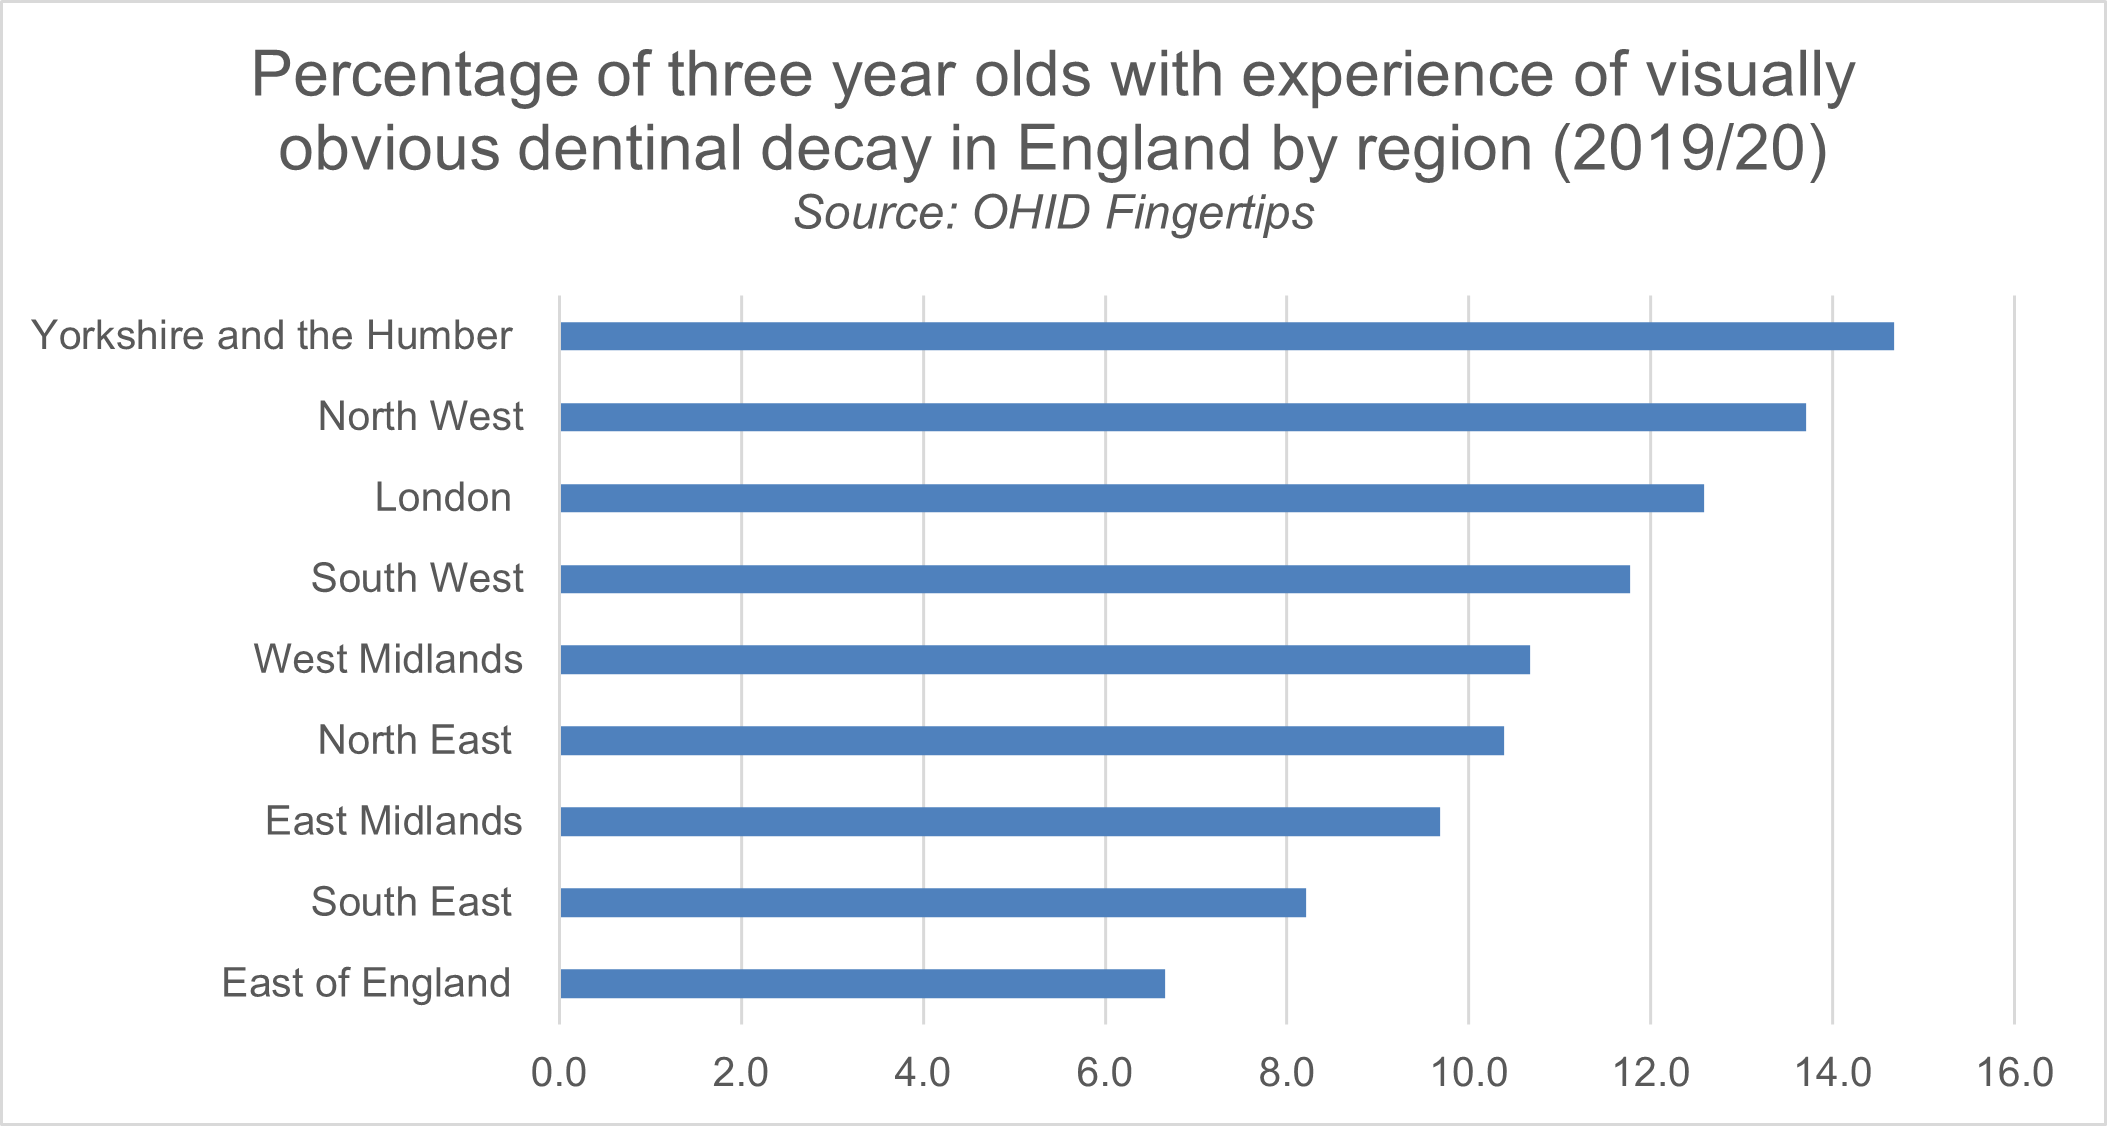 Bar char showing he percentage of 3 year olds with experience of visually obvious dentinal decay in England by region (2019/20). The source is the Office of Health Improvement and Disparities Fingertips website. 